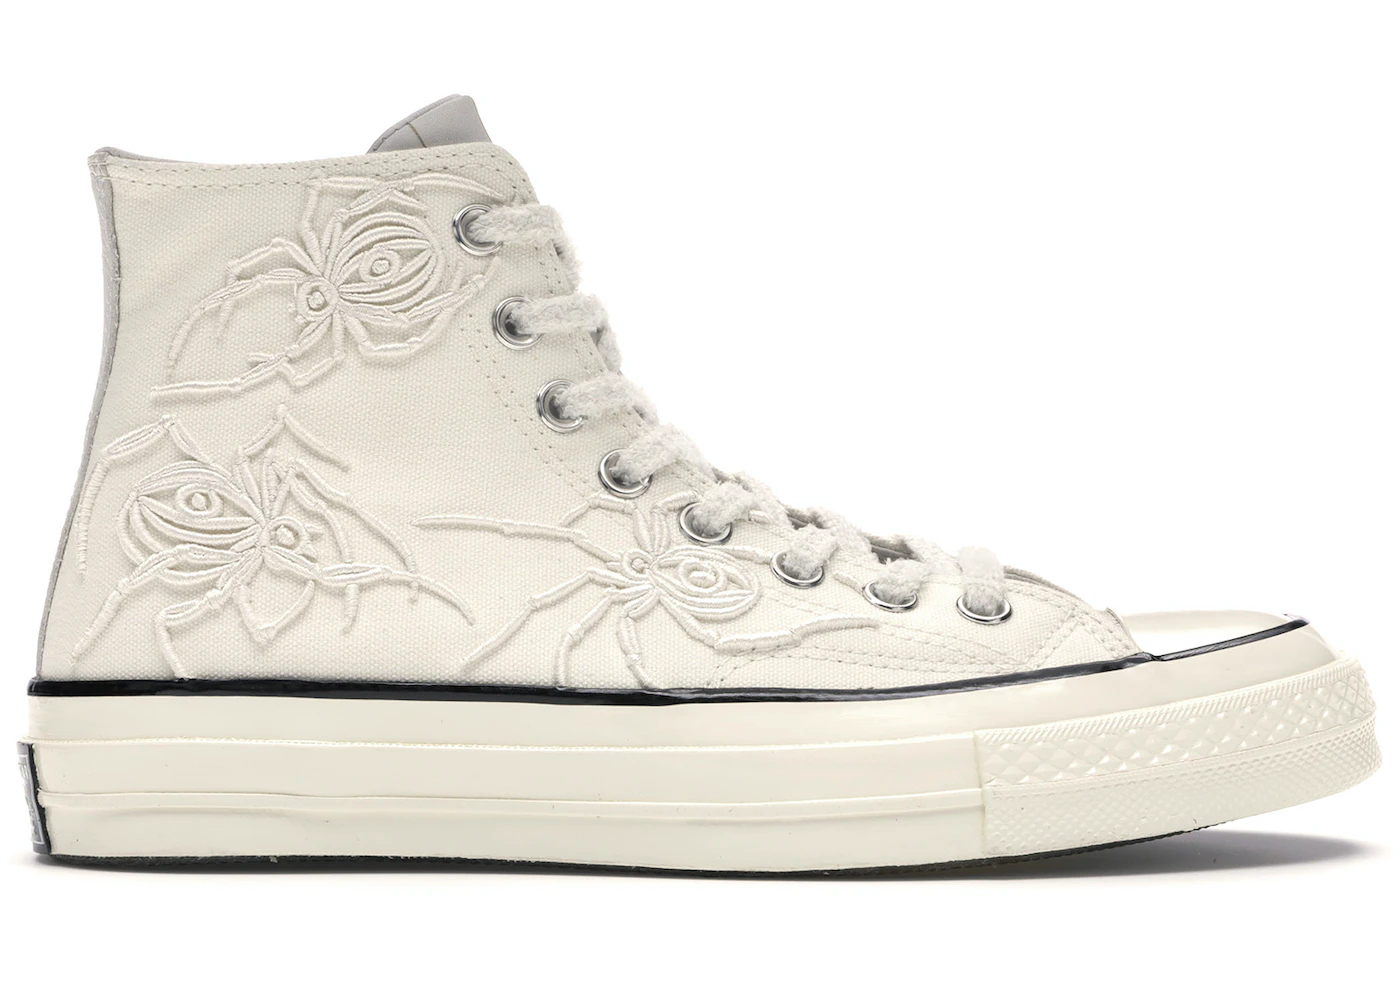 Advertiser Confused spray Converse Chuck Taylor All-Star 70 Hi Dr. Woo White - 160917C - US